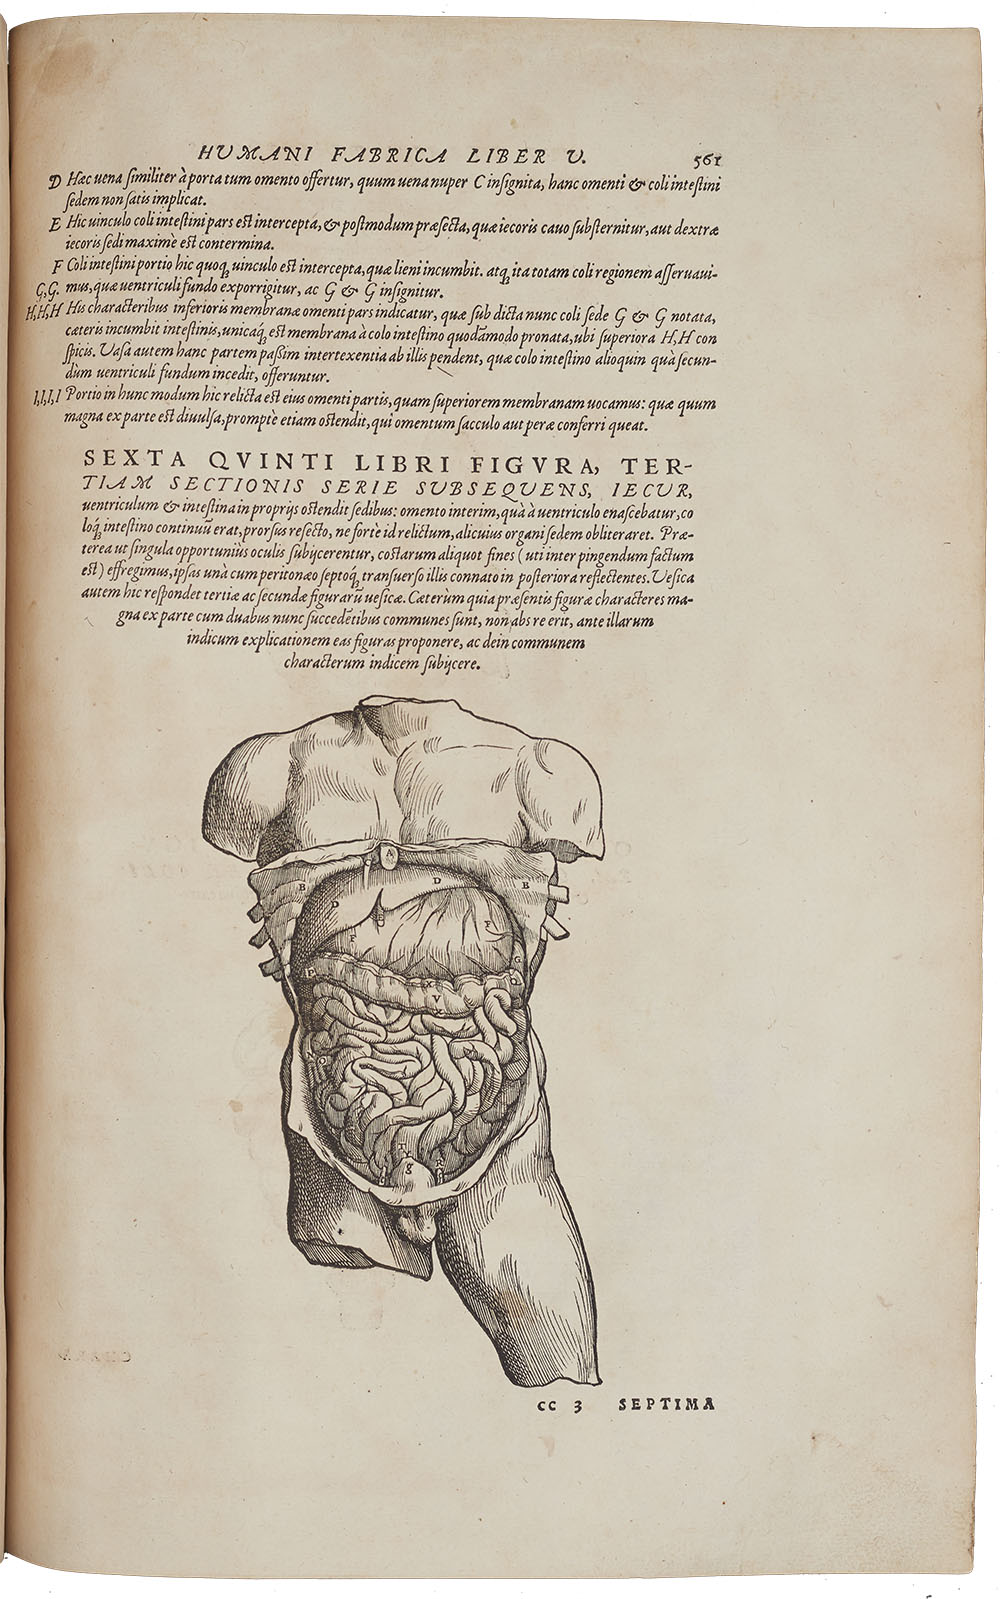 <p>Observational anatomical drawing showing the layers of the trunk of the human body. With its detailed accurate labelled drawings and accompanying text, Vesalius’ ‘Fabric of the Human Body’ was a turning point in the history of medicine.</p>
